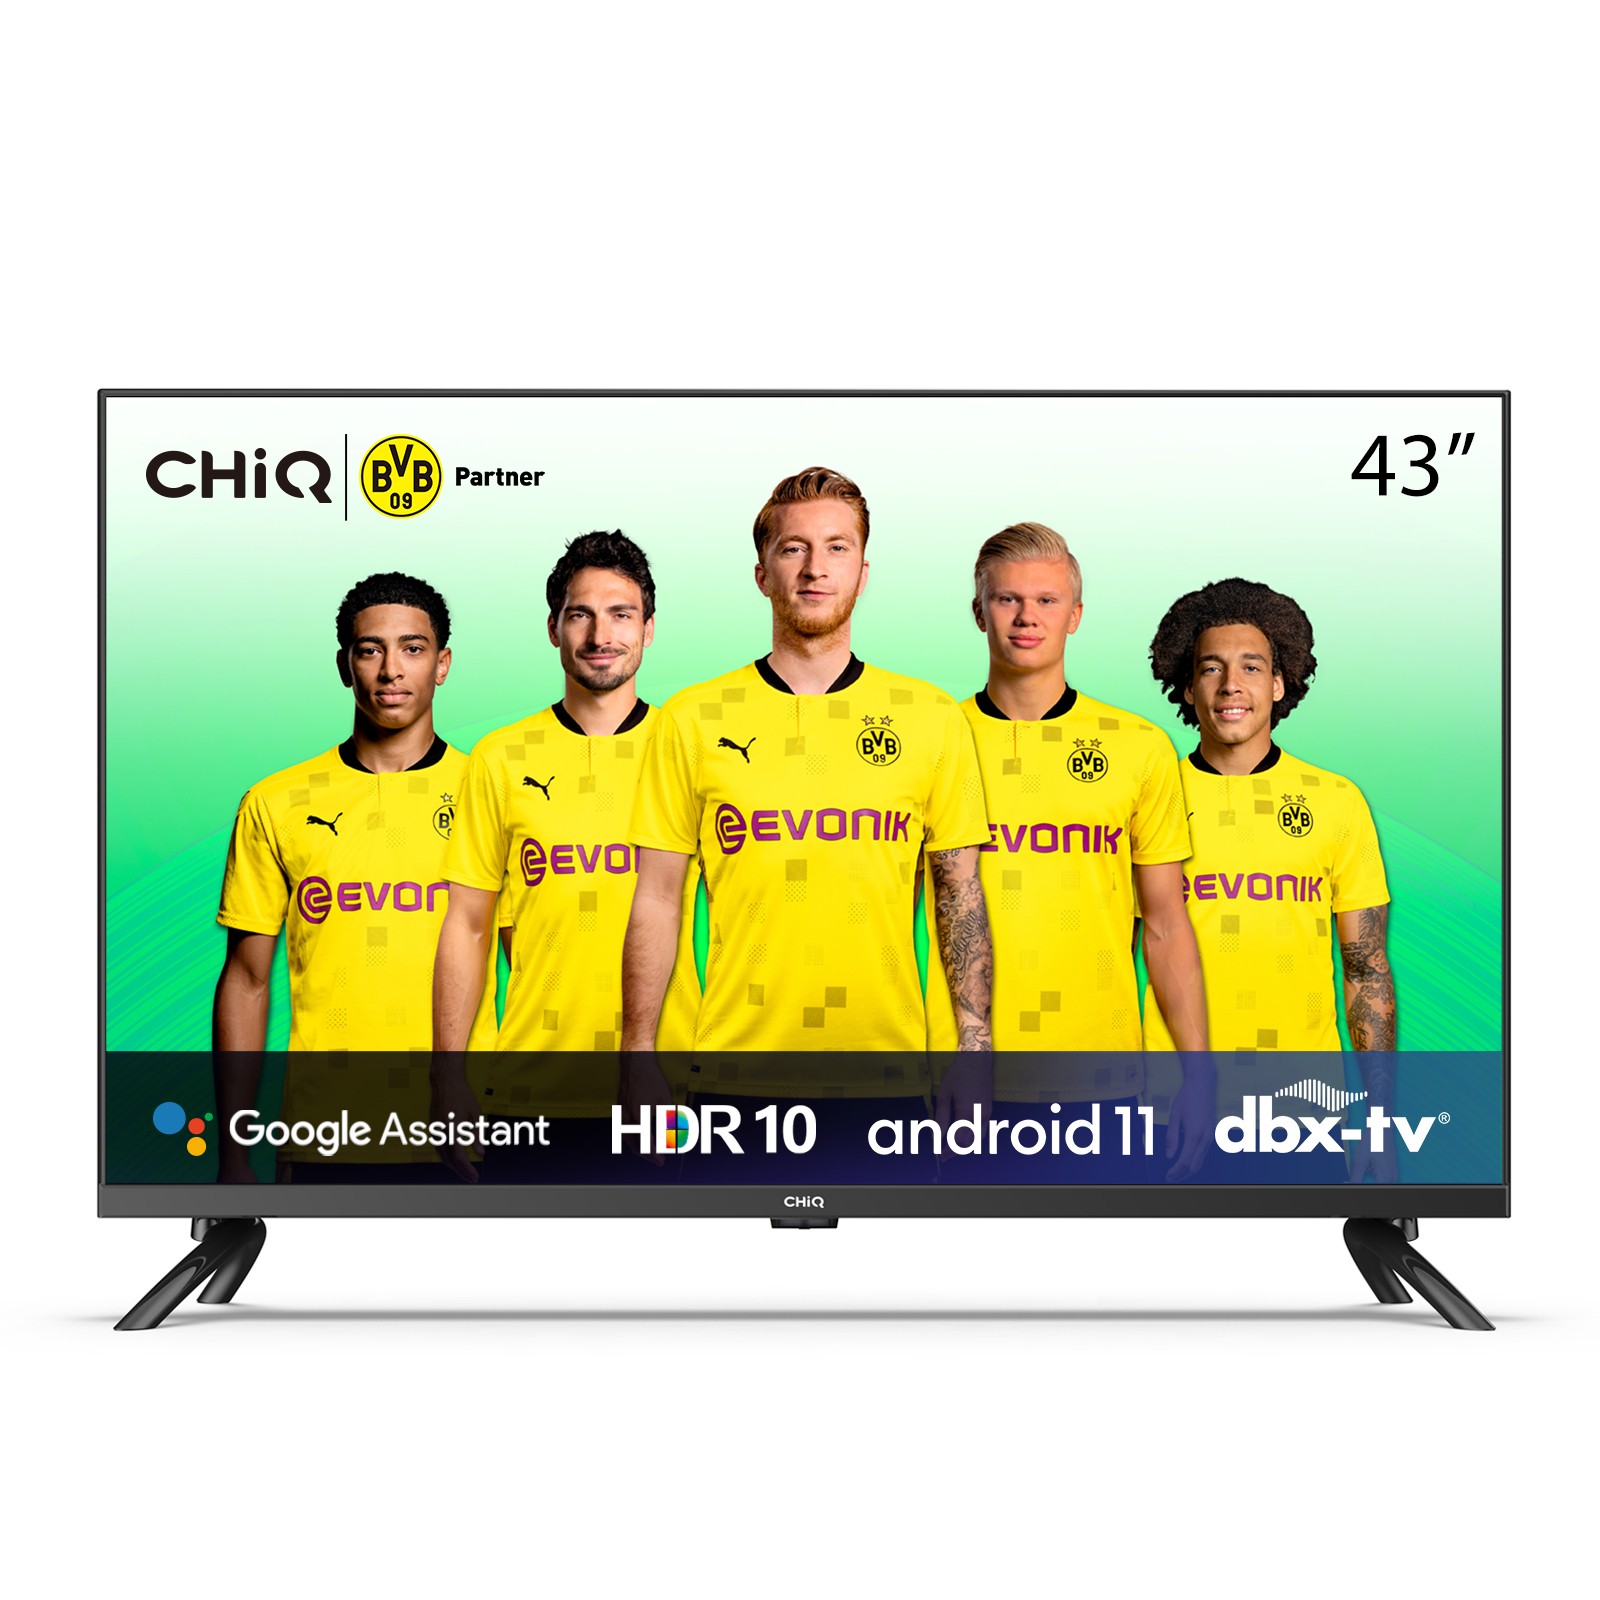 Chiq 43" L43G7P  FHD Android Smart Tv